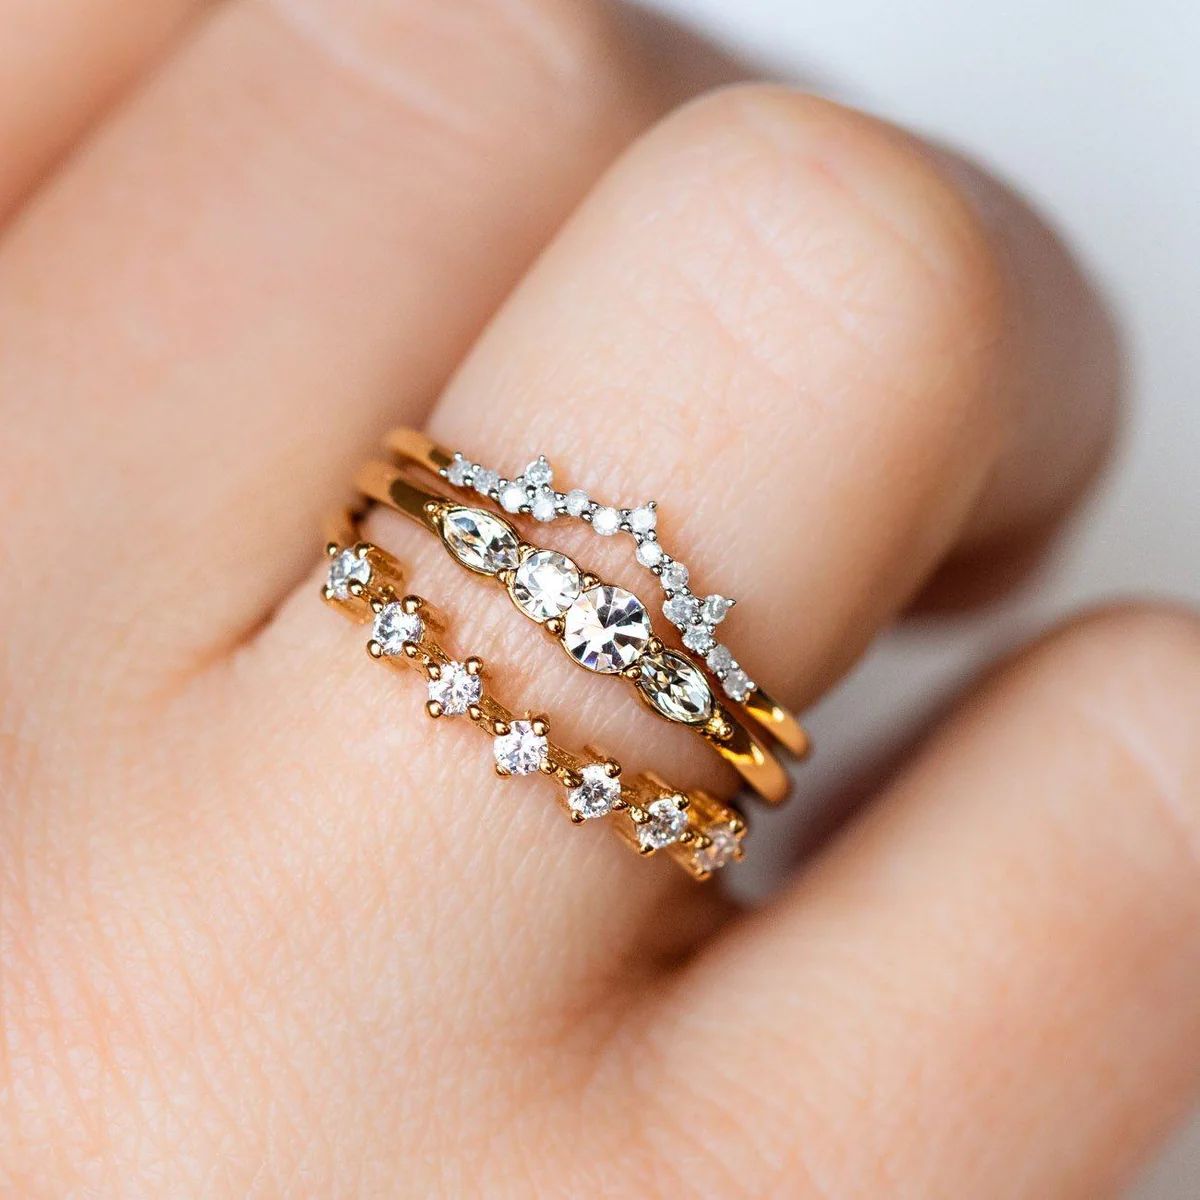 Diamond Arc Stacking Ring | Local Eclectic